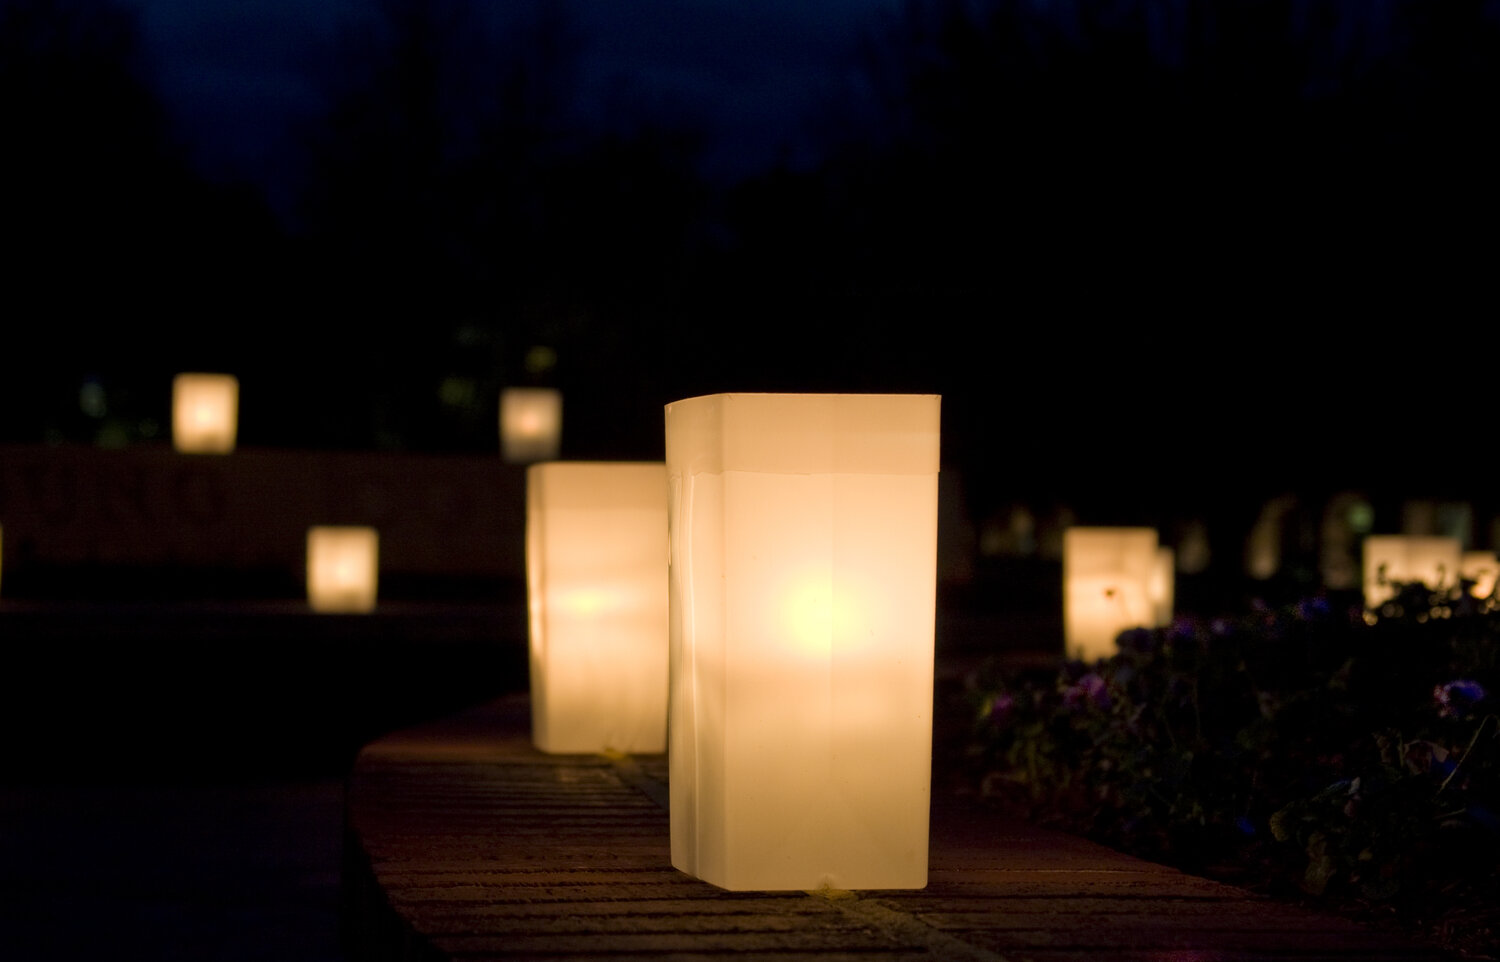 Luminaries will play a role in remembrance events at Michigan State University on Tuesday for the first anniversary of the campus' mass shooting.